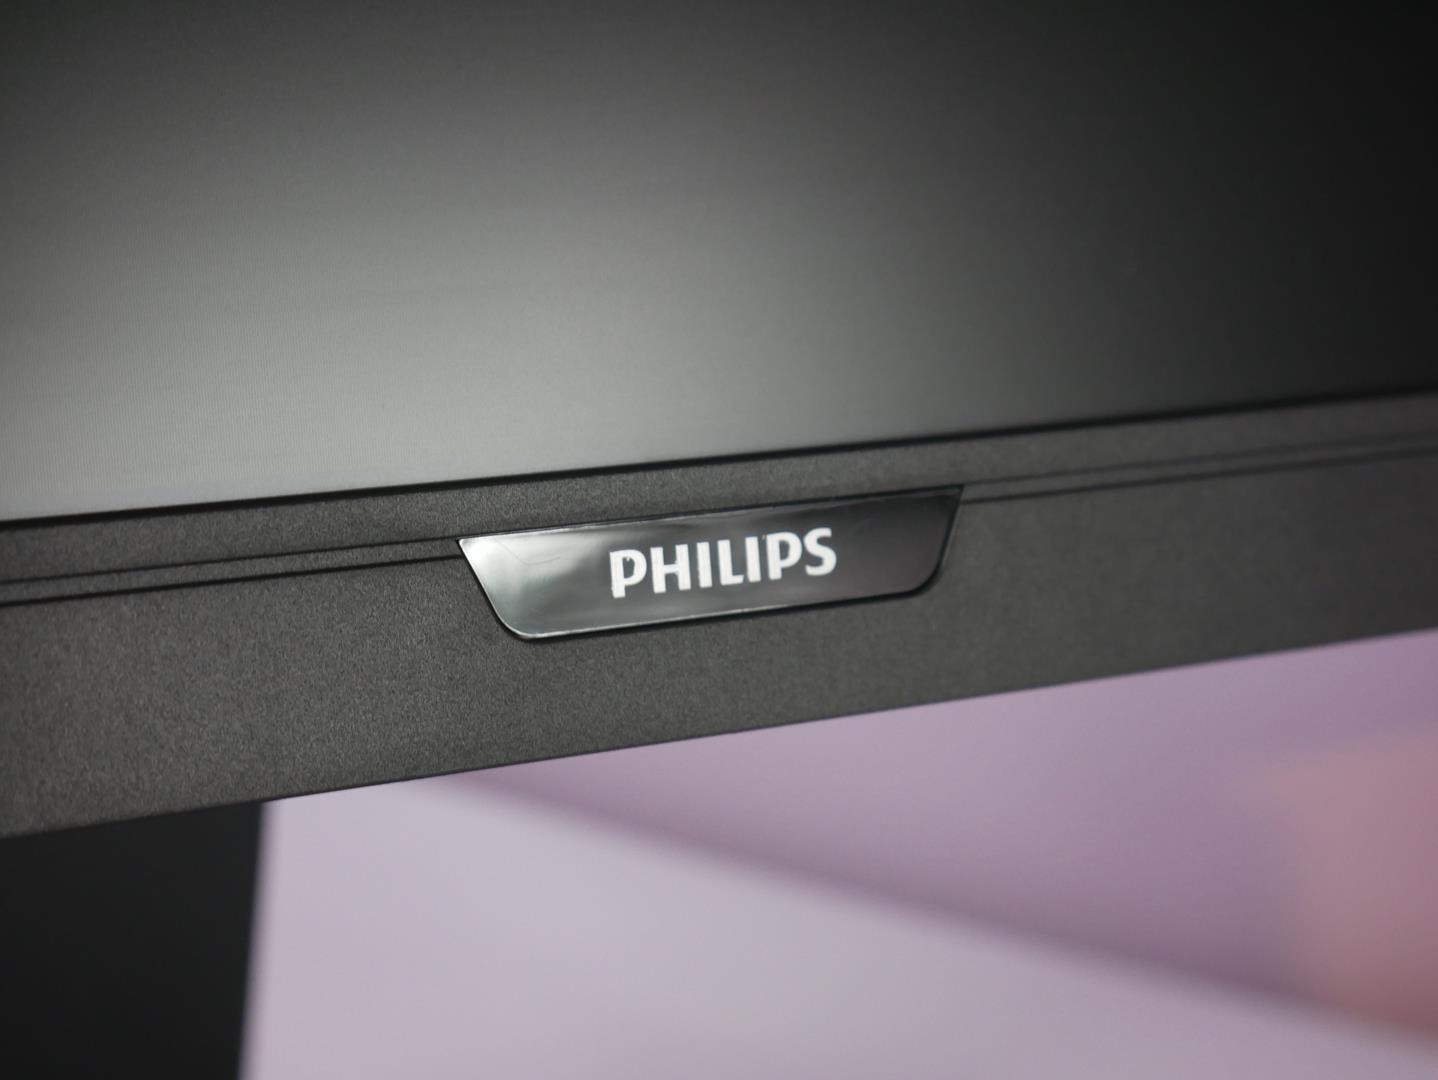 Philips 243B9 Monitor Review